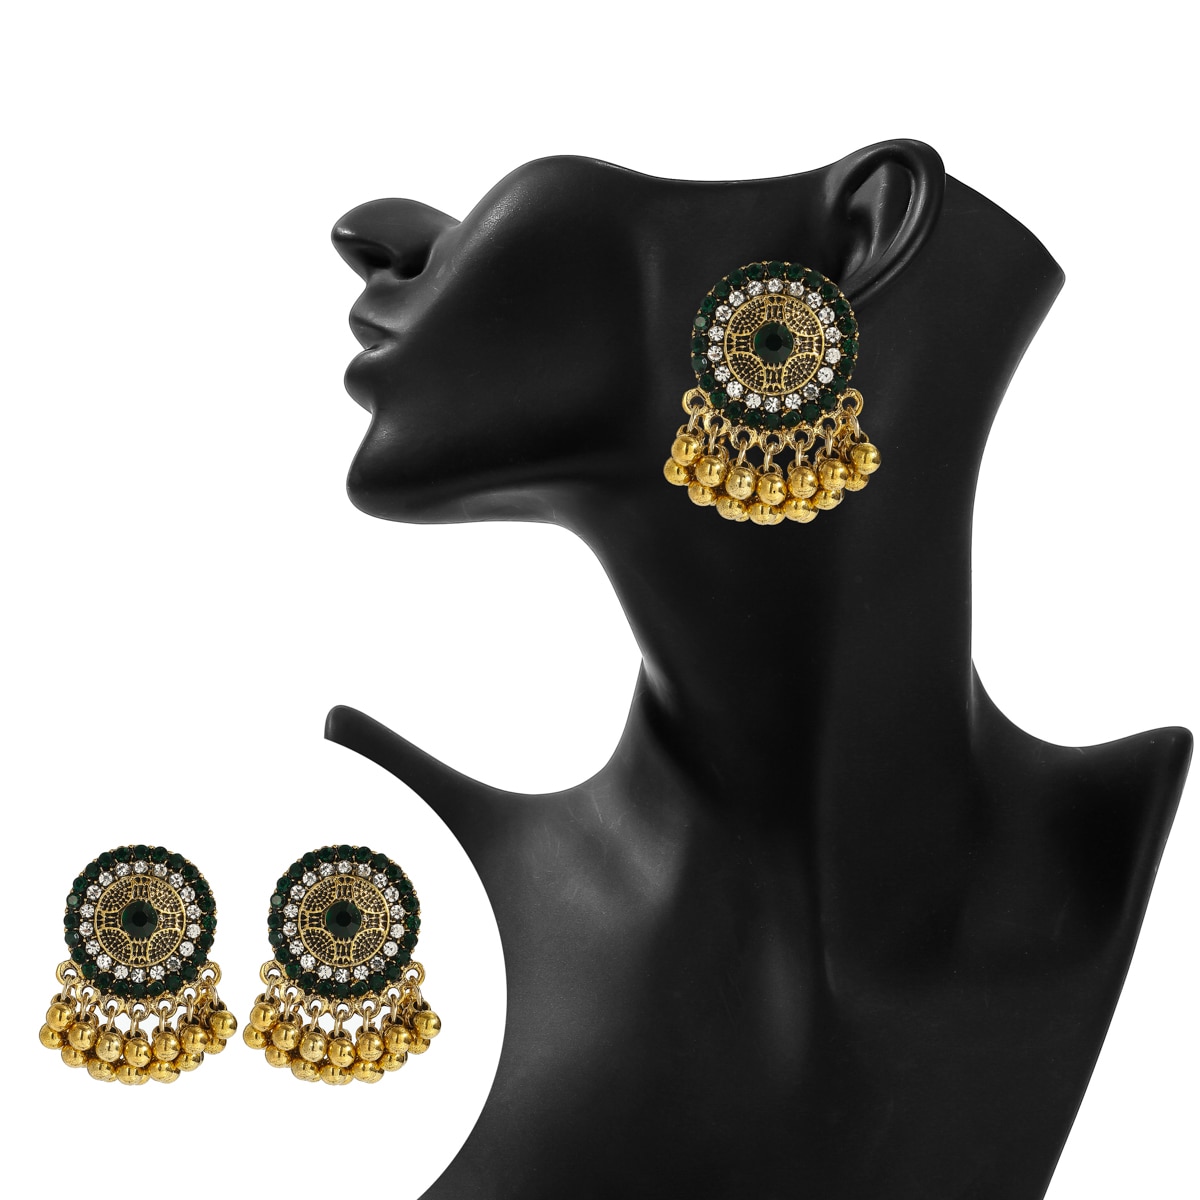 Classic-Ethnic-CZ-Indian-Earrings-For-Women-Gypsy-Round-Alloy-Jhumka-Earring-Fashion-Jewelry-Orecchi-3256804584391767-8